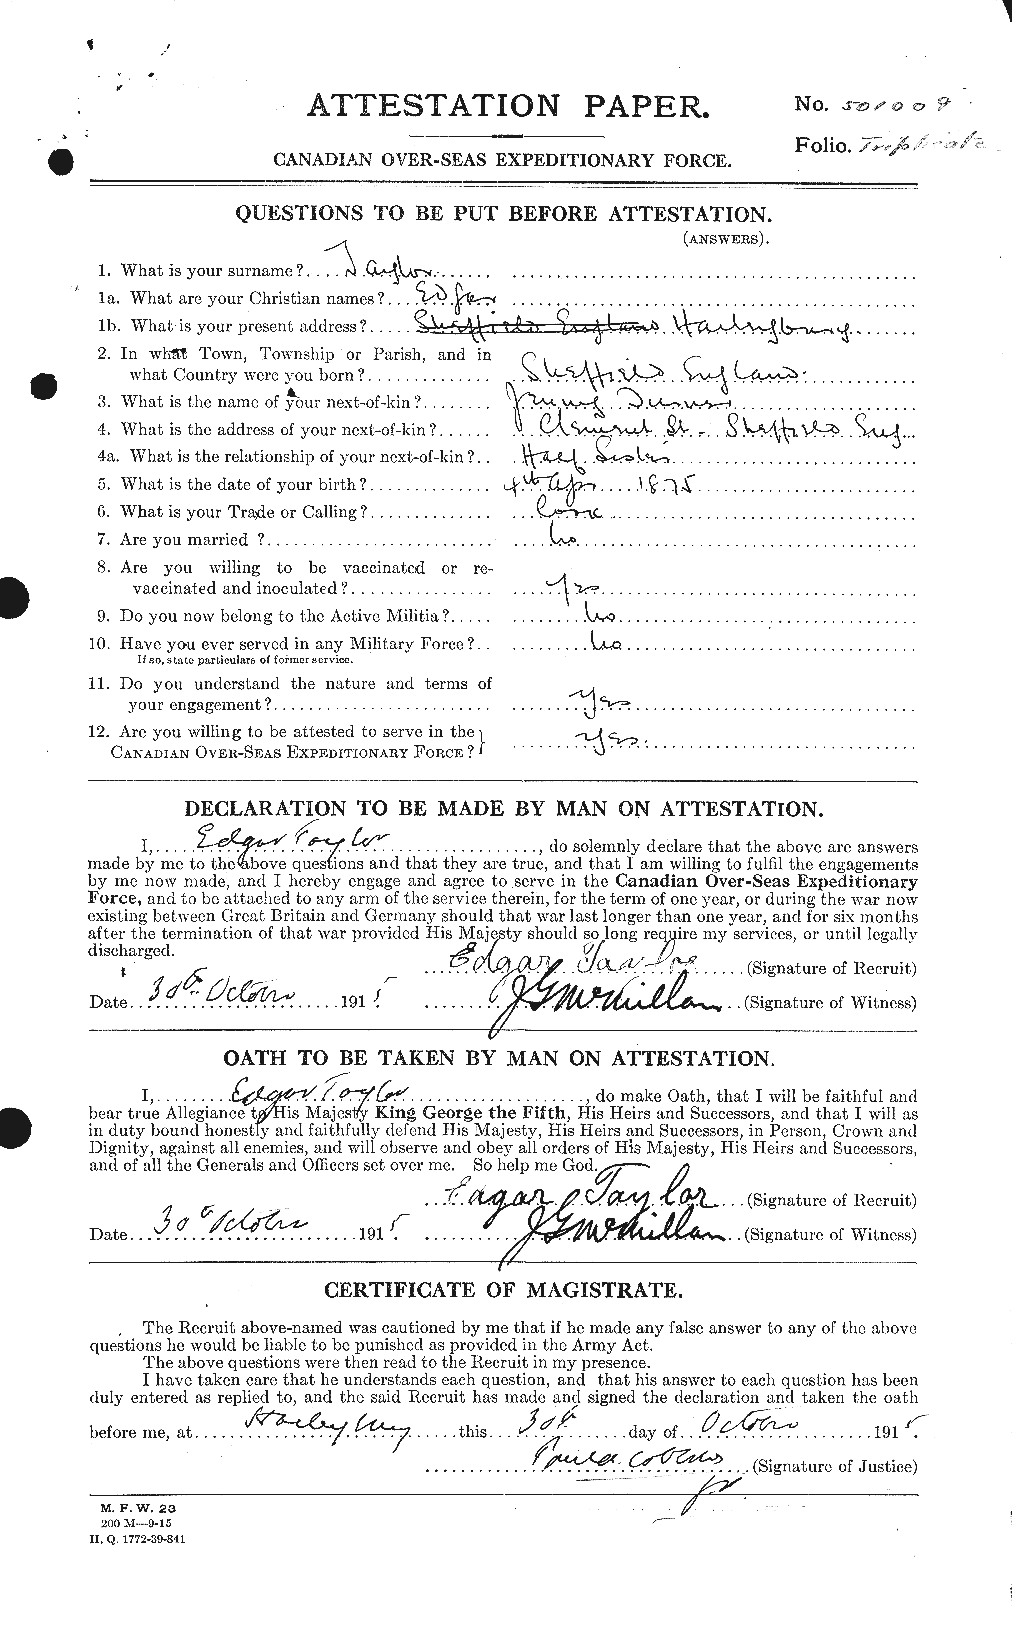 Personnel Records of the First World War - CEF 627272a